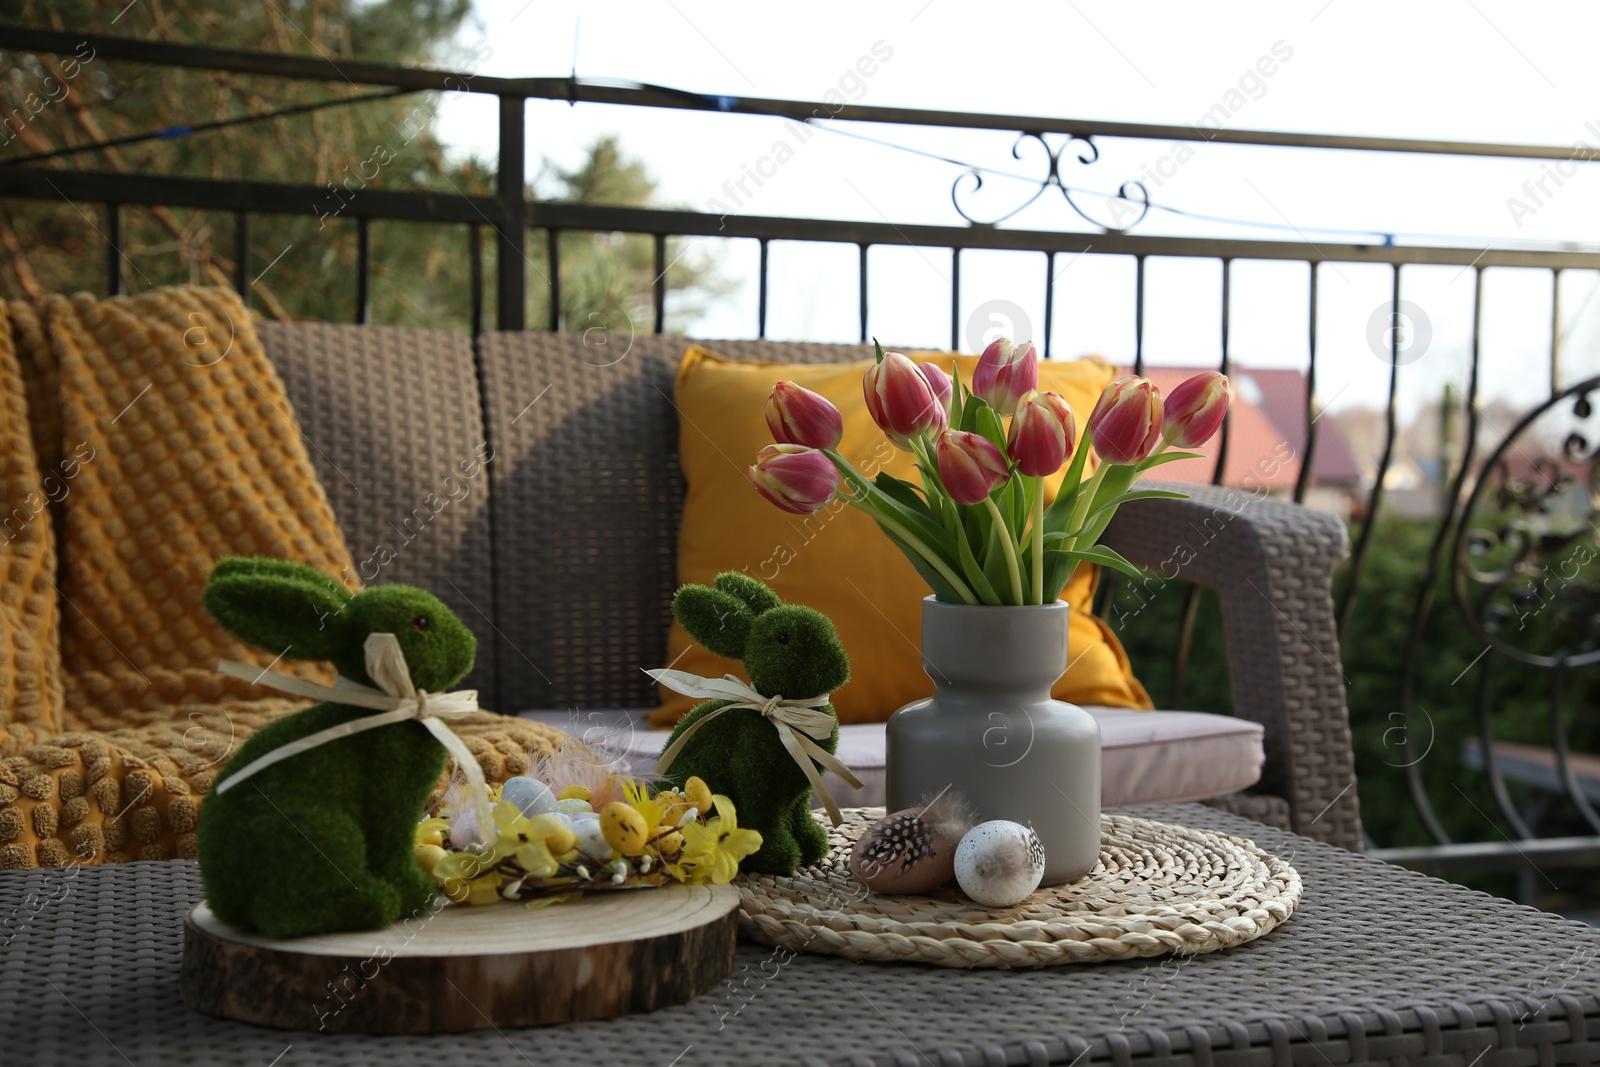 Photo of Terrace with Easter decorations. Bouquet of tulips in vase, bunny figures, decorative nest and eggs on table outdoors